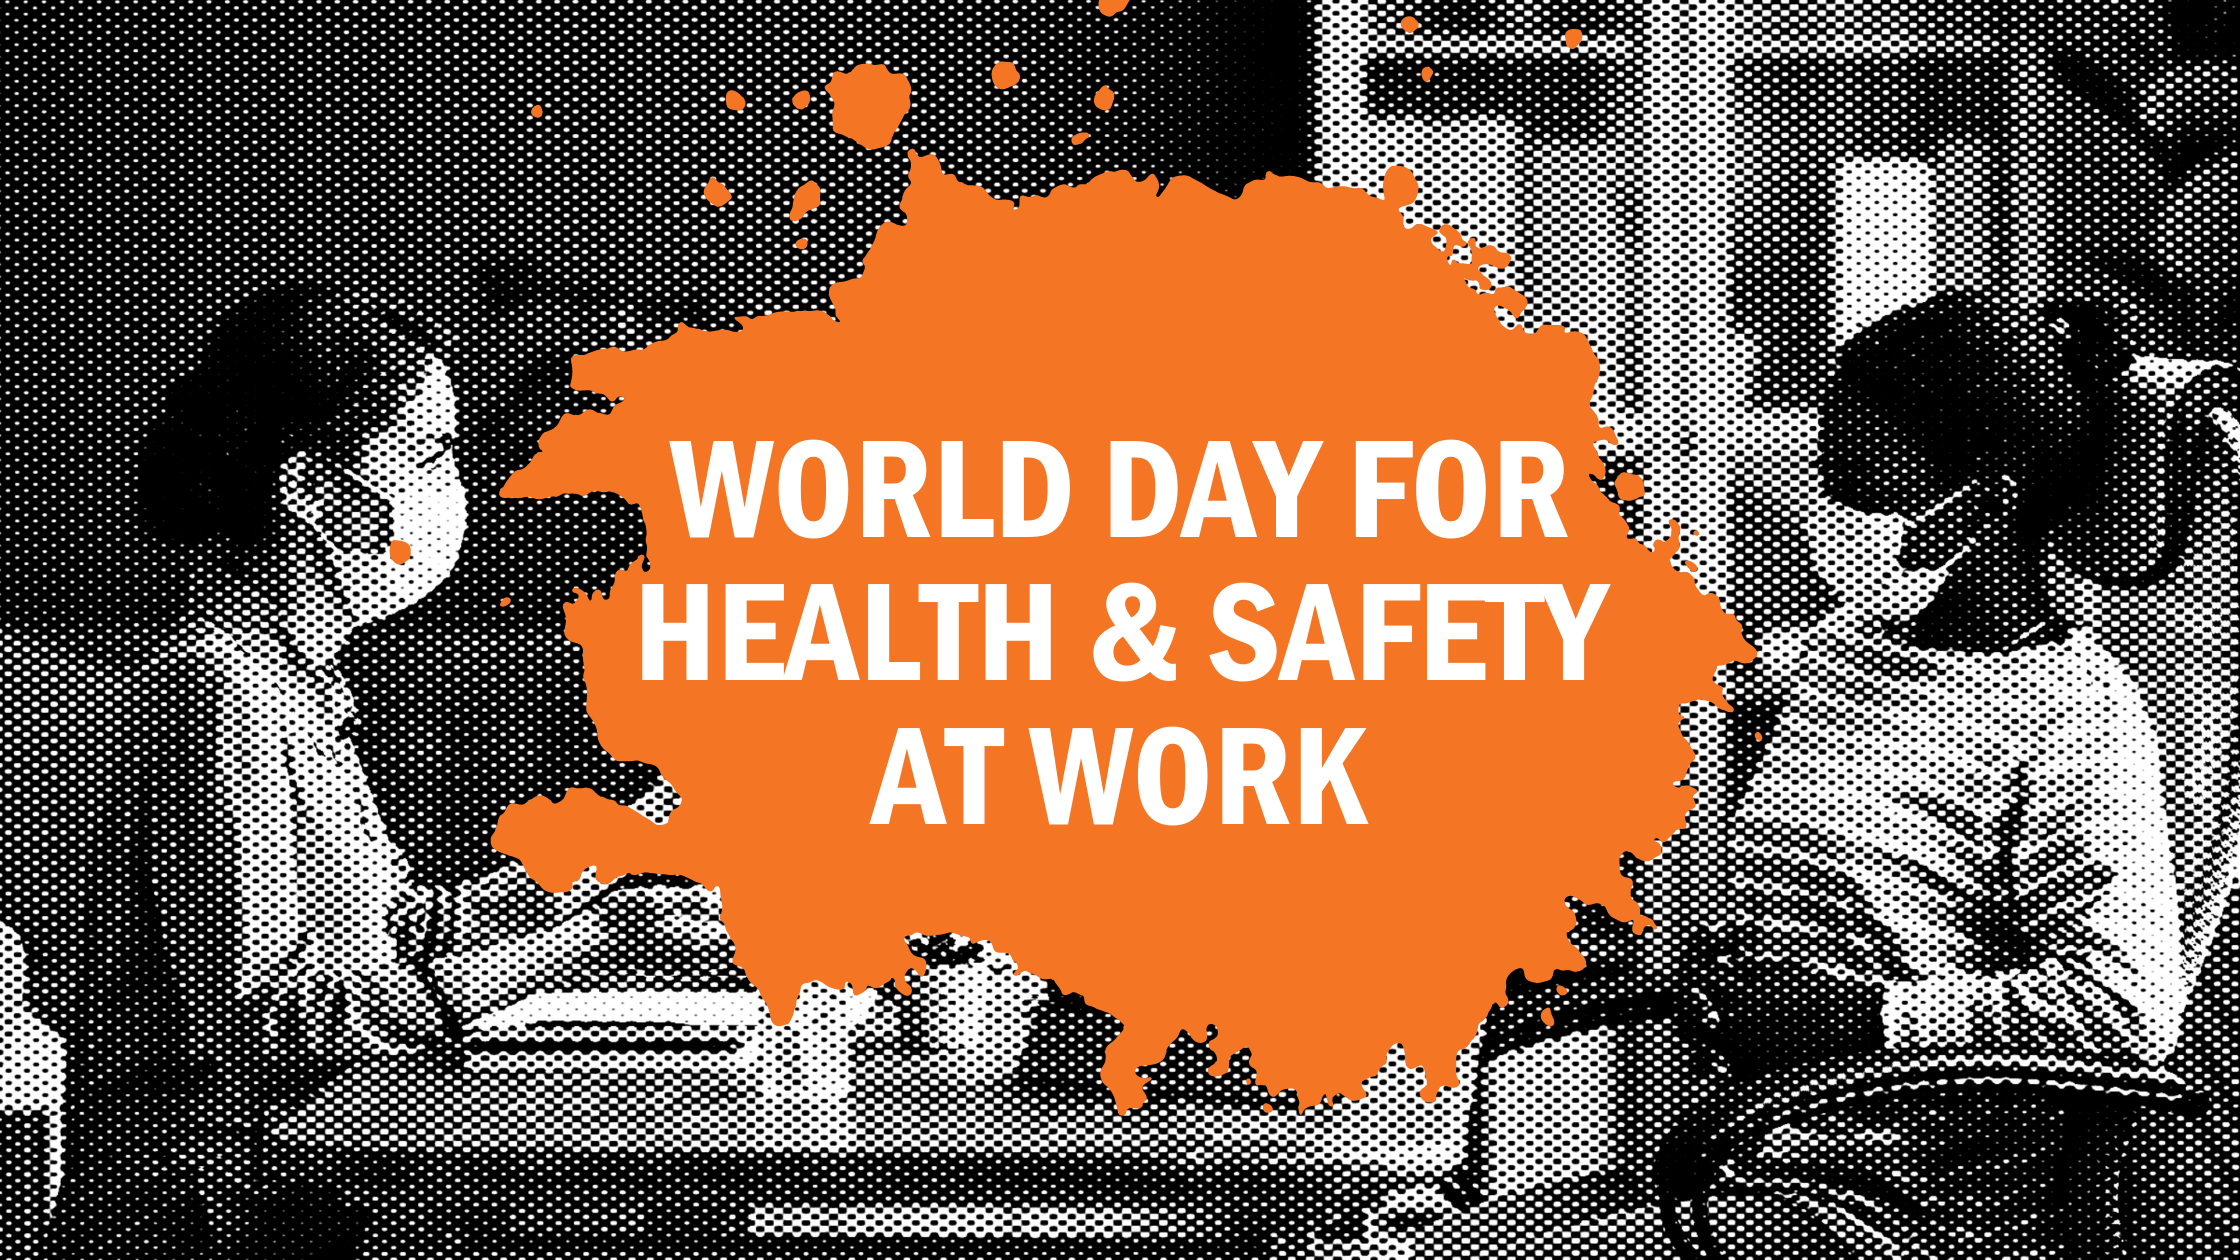 World Day for Health and Safety at Work